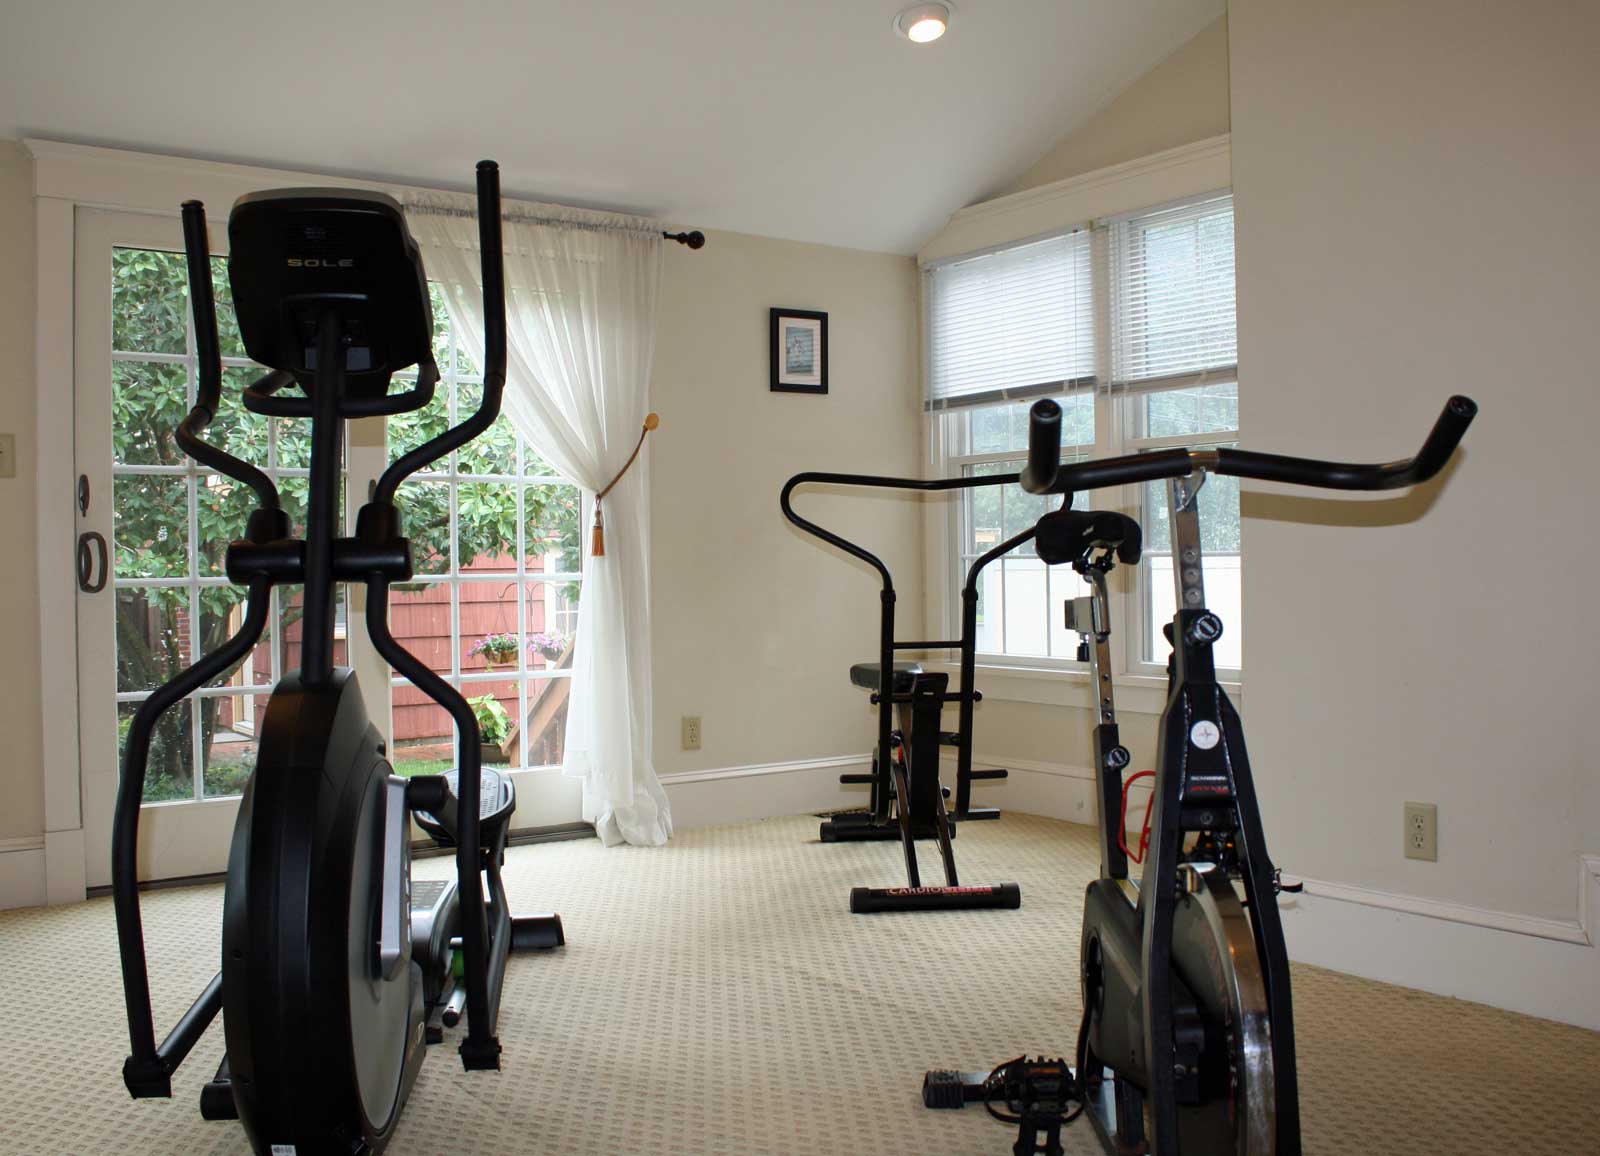 Fitness room with spinner bike, elliptical machine, and rowing machine